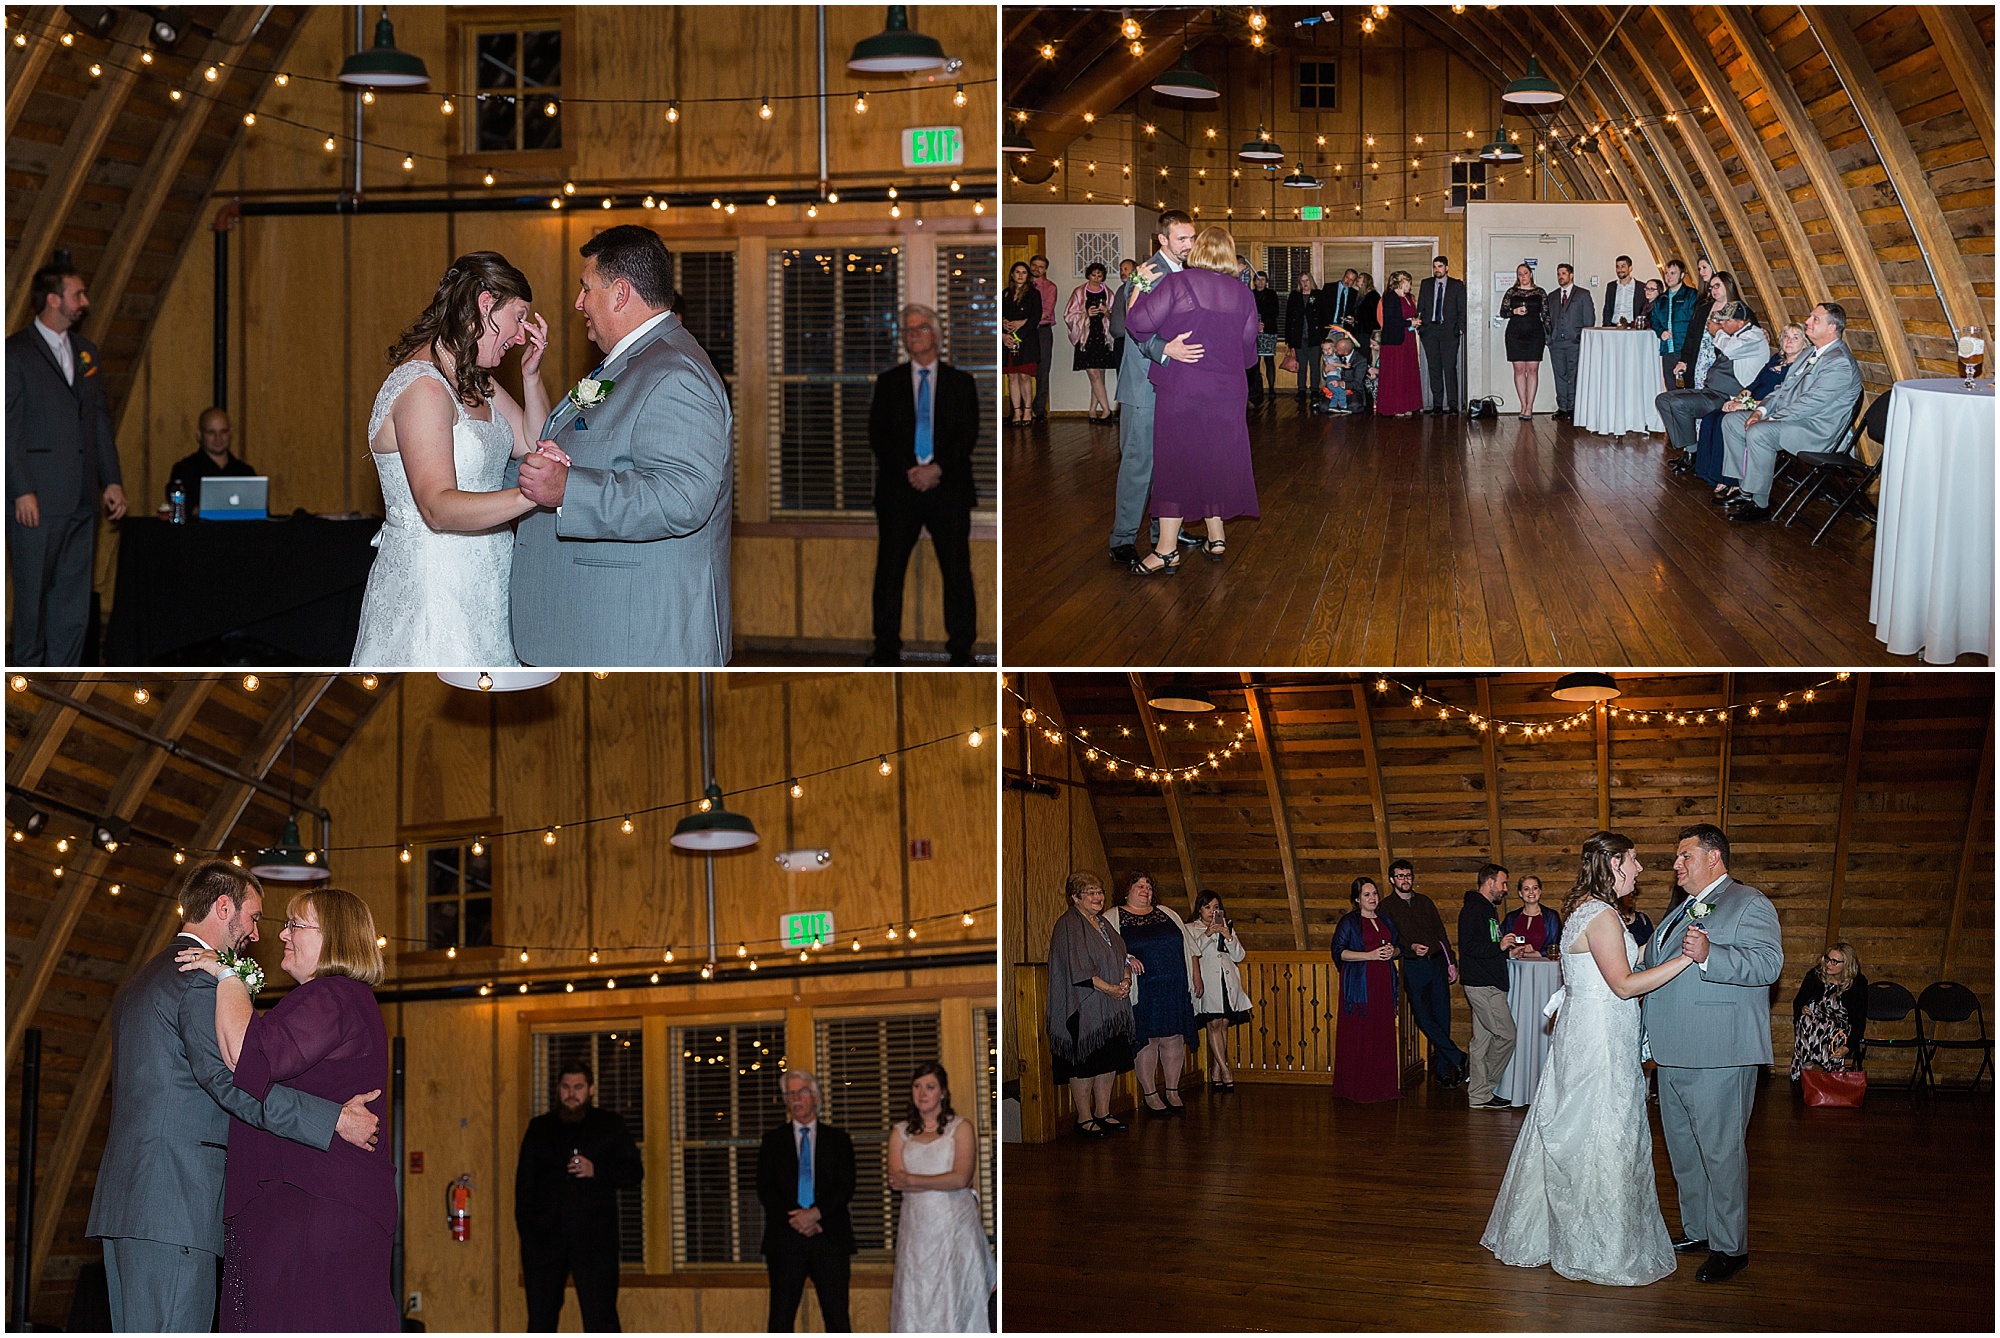 A daddy-daughter and mother-son dance at this Hollinshead Barn fall wedding in Central Oregon. | Erica Swantek Photography